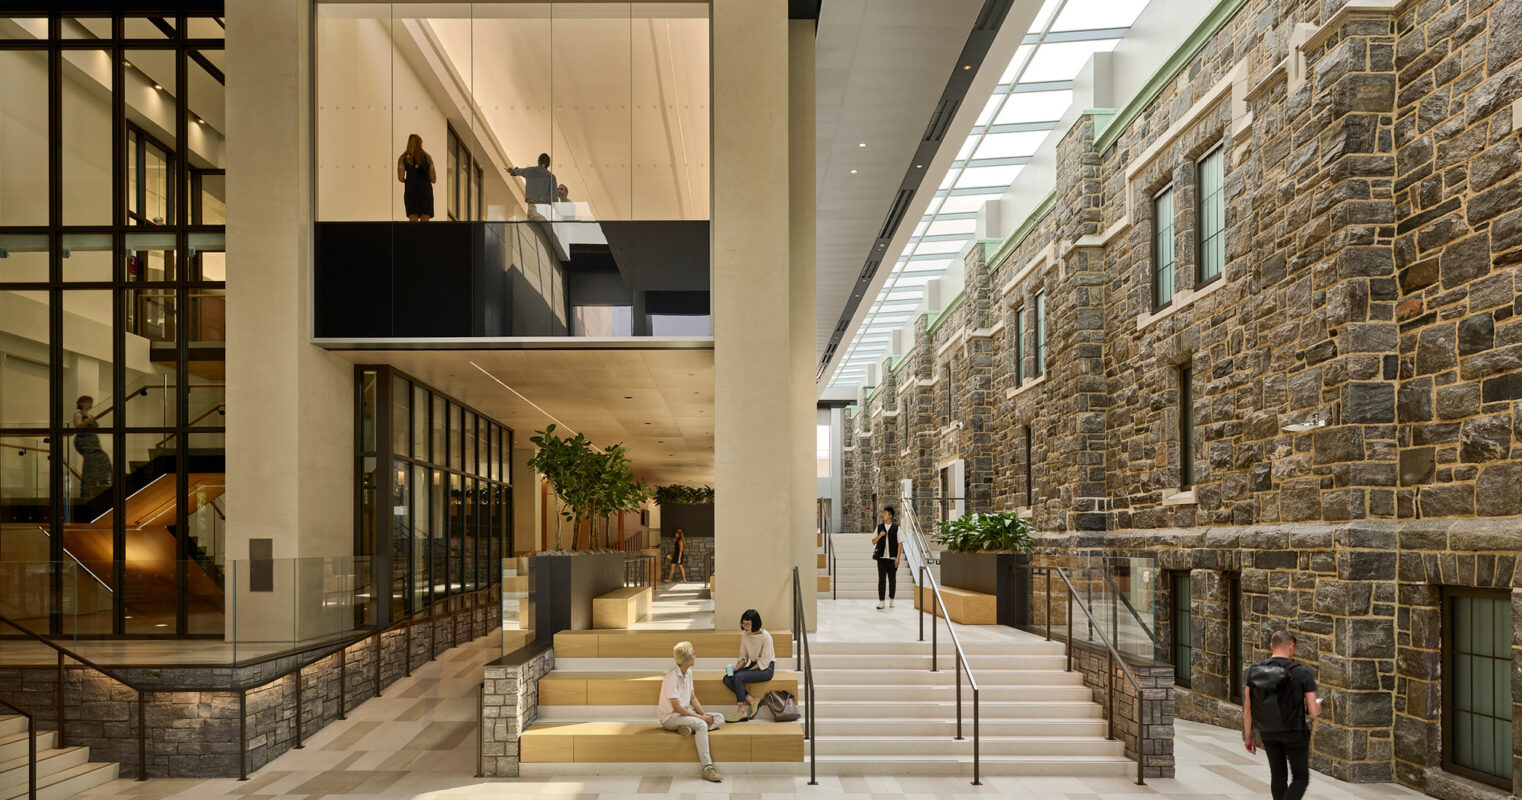 Modern atrium blending contemporary design with classic stone architecture, featuring individuals engaged in various activities throughout the open, sunlit space.